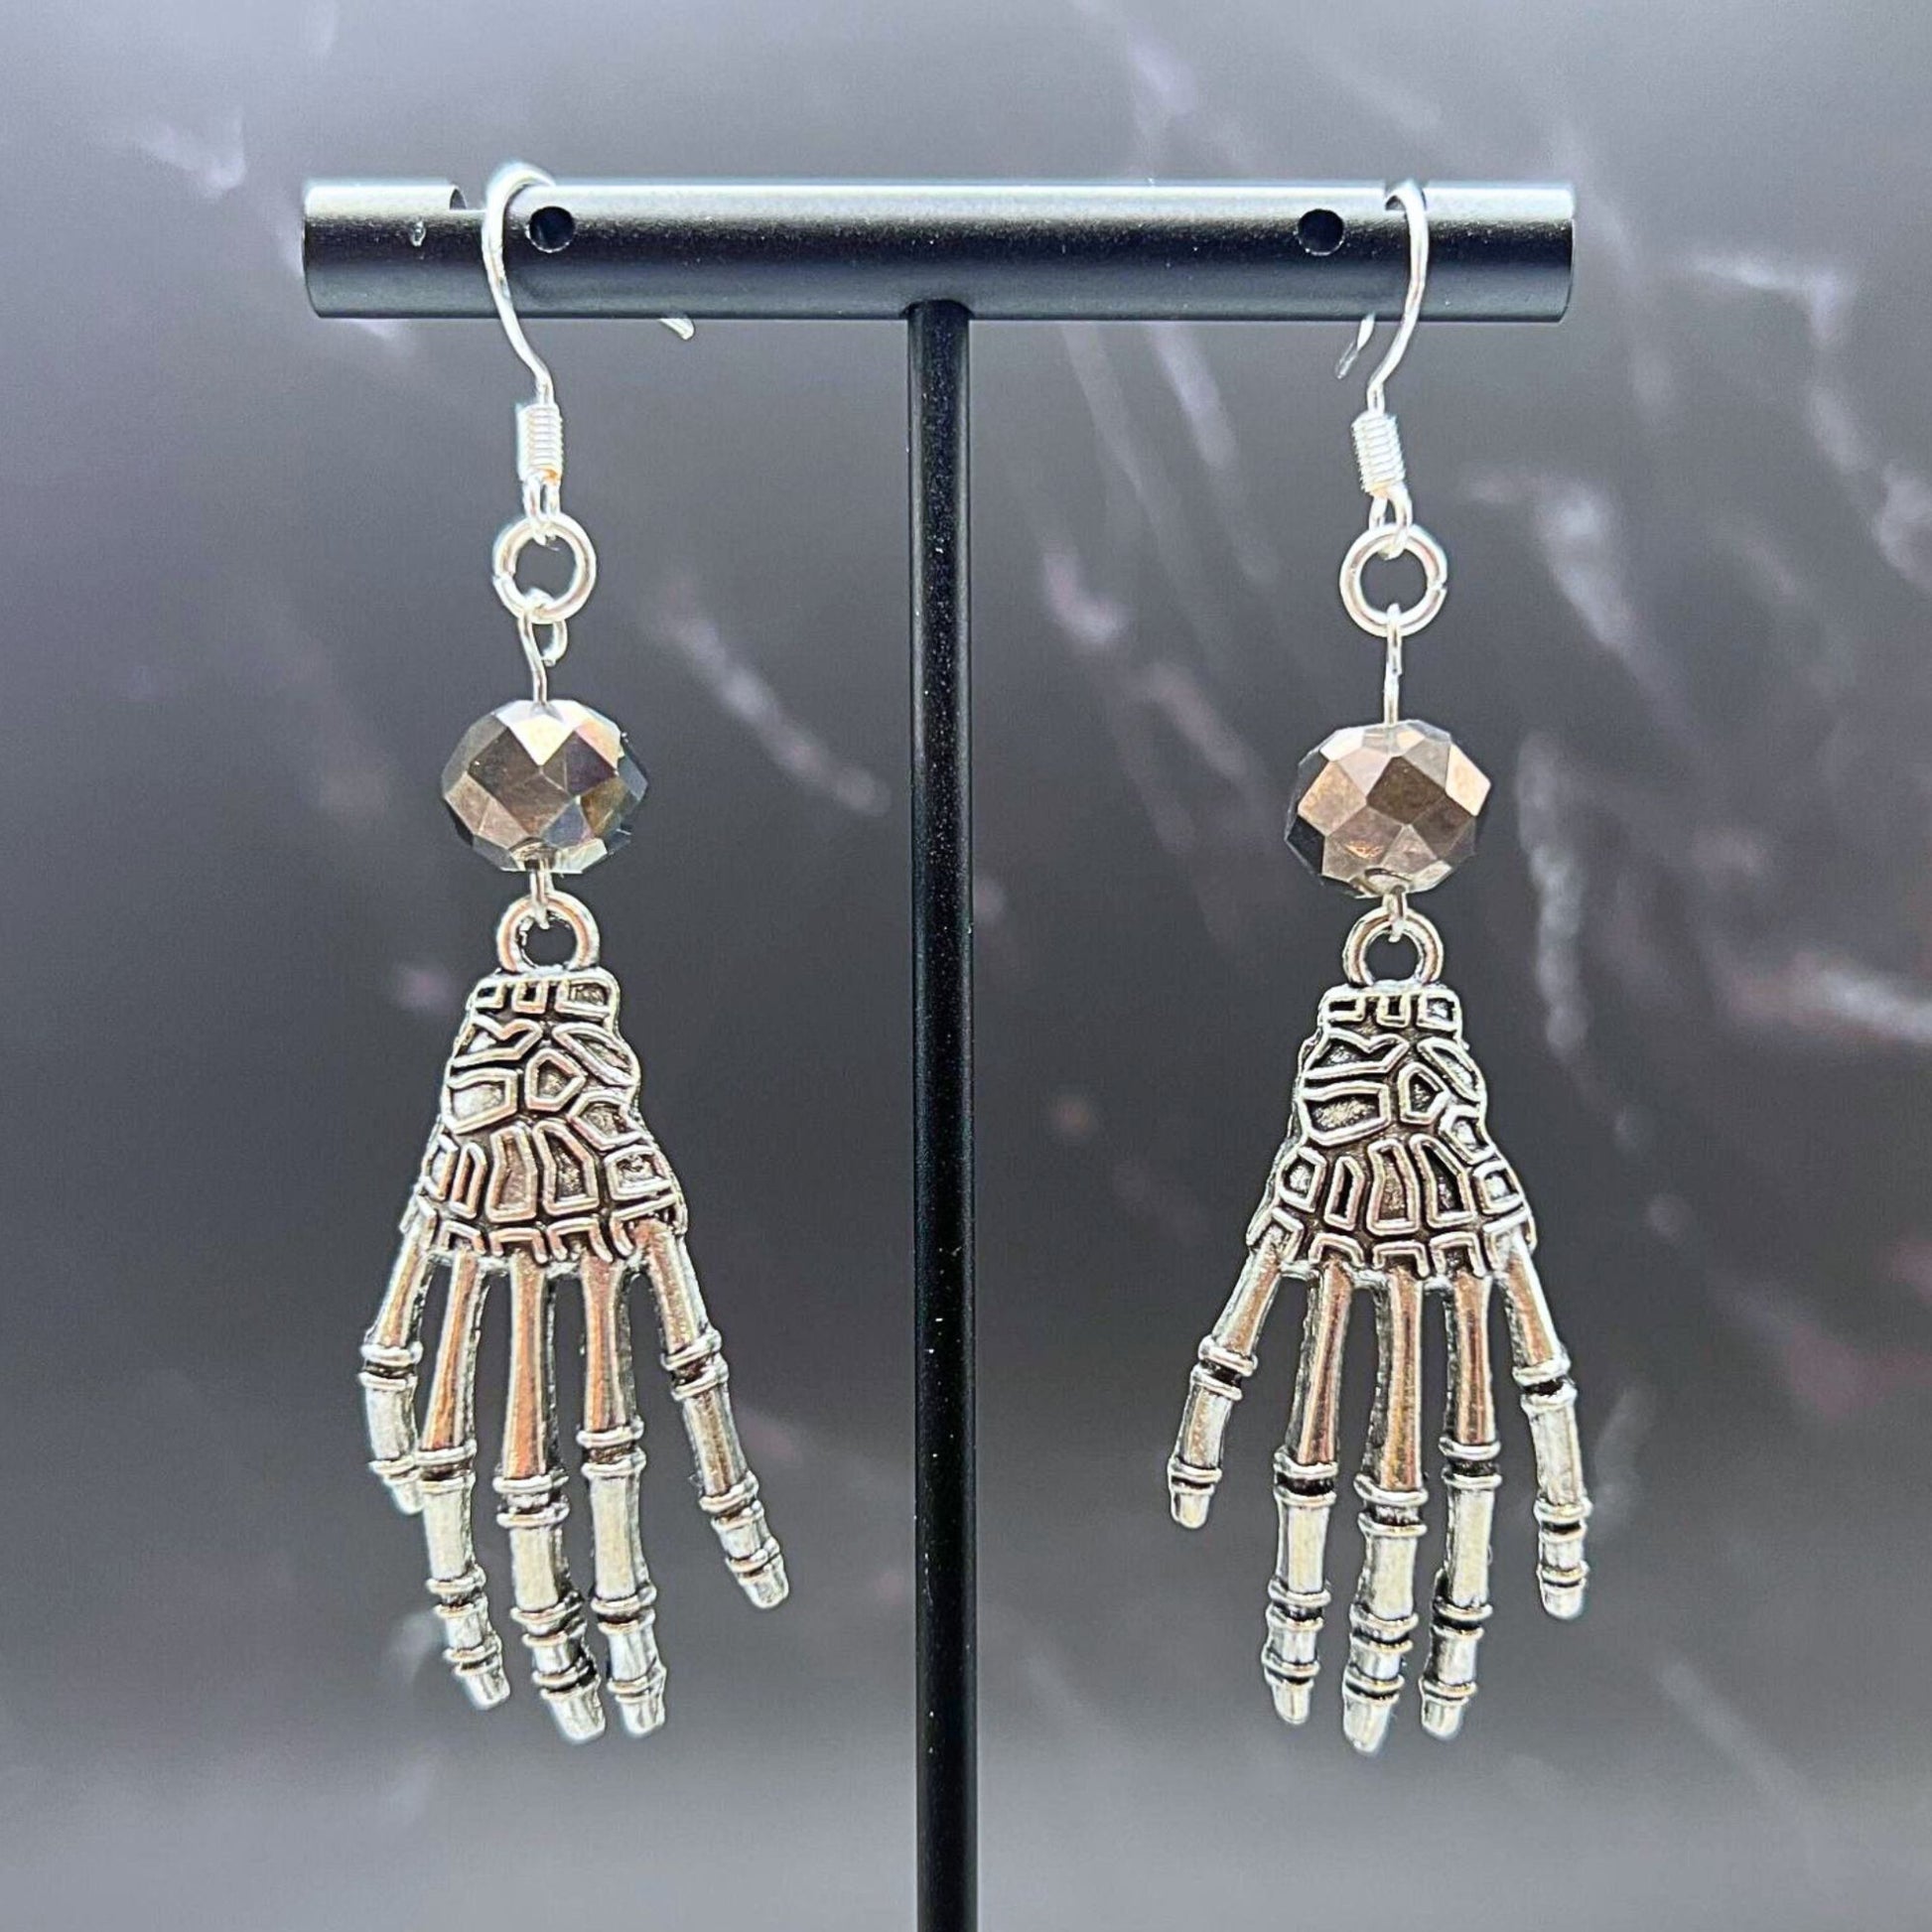 Skeleton Hand Beaded Earrings. Displayed on a clear stand.